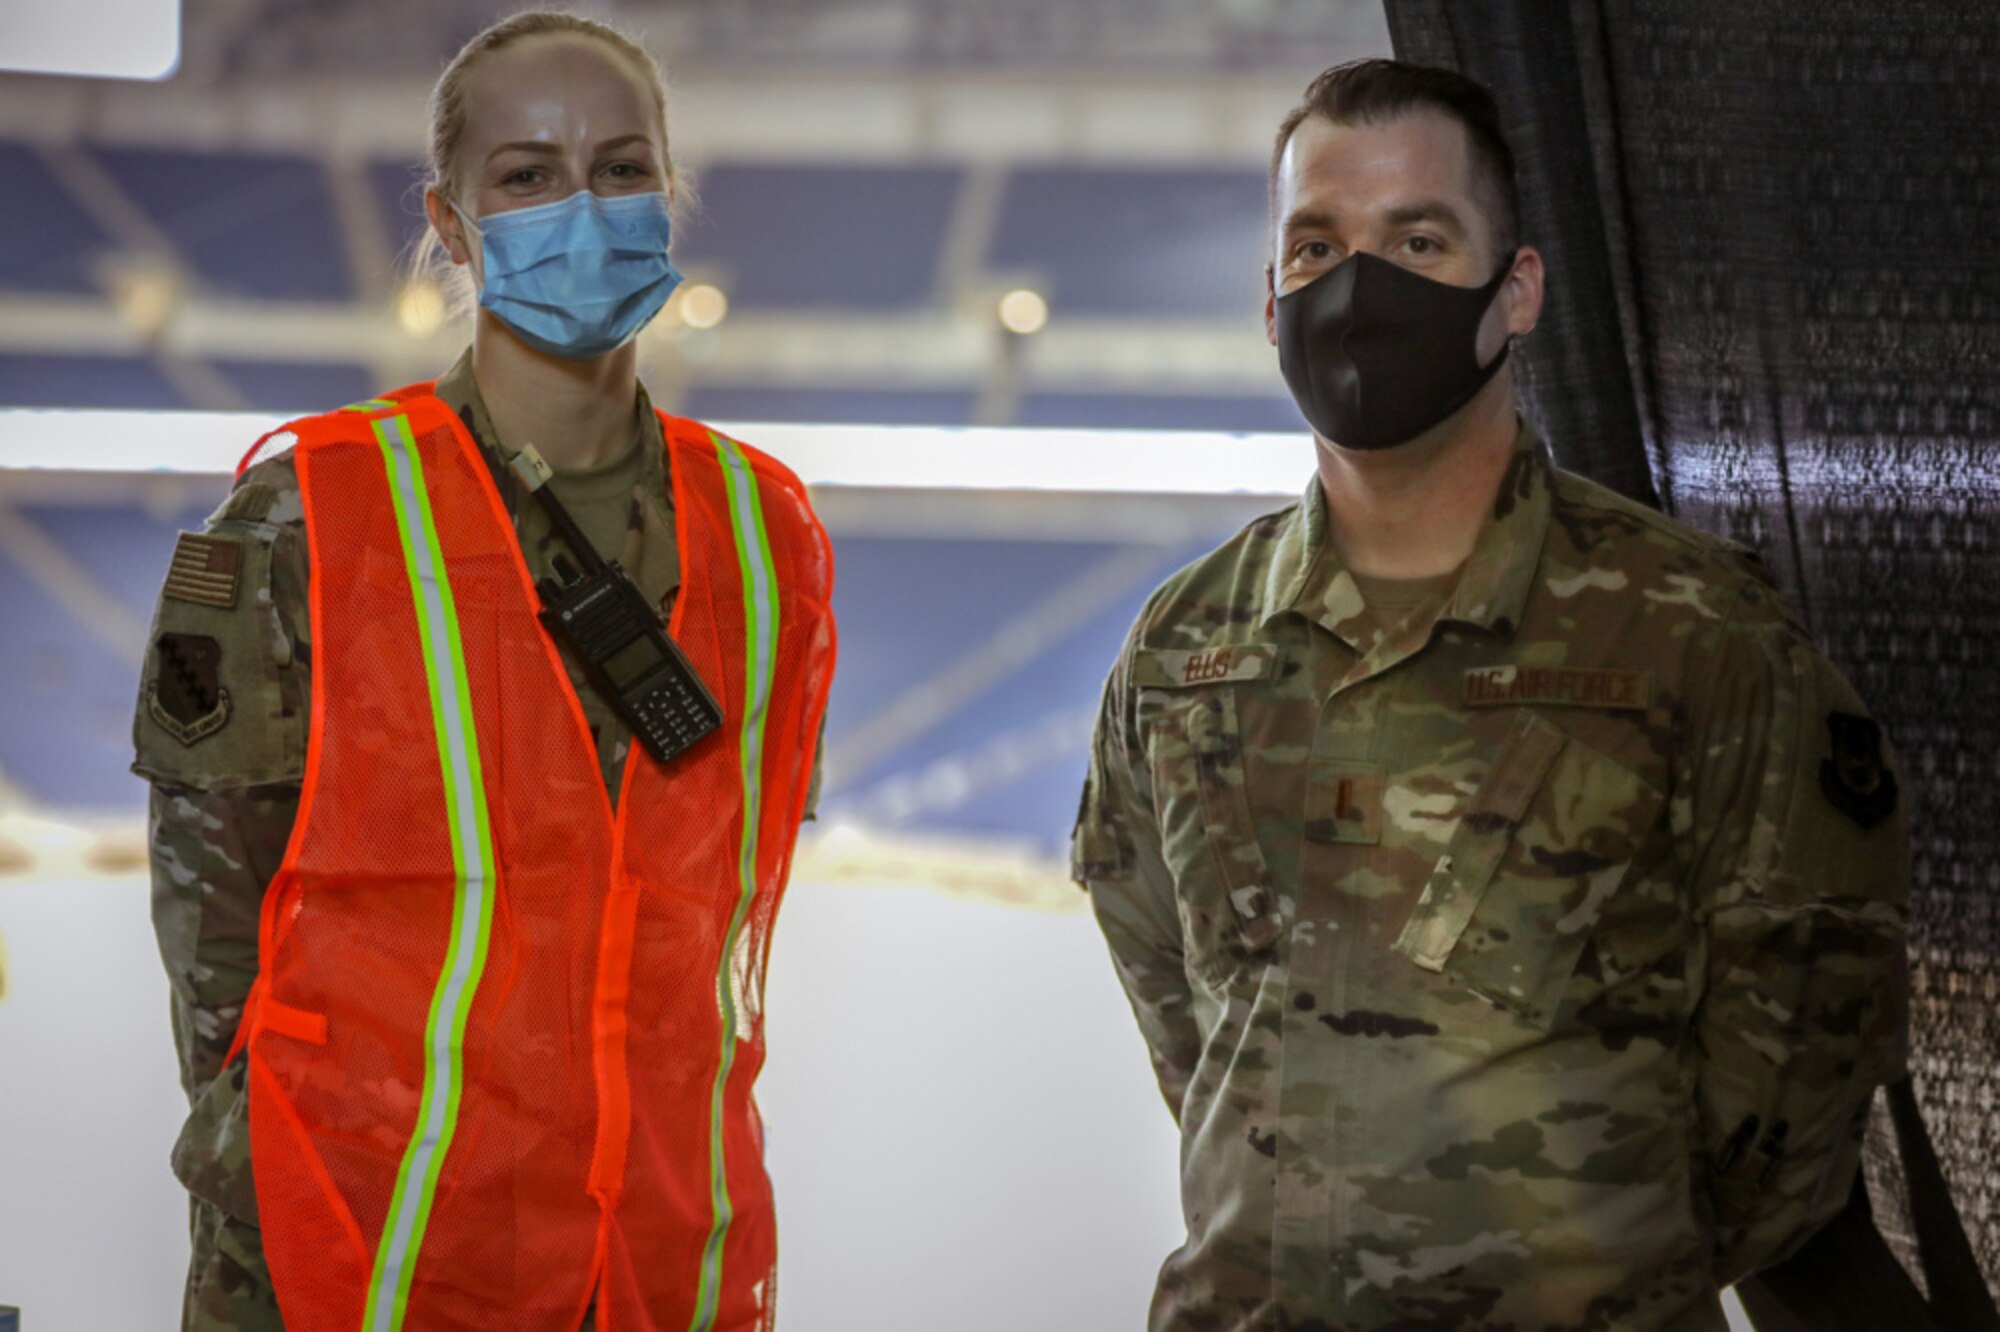 Capt. Victoria Zenyuch,and 2nd Lt. Christopher Ellis, a registered nurse and administration officer from the 66th Medcical Squadron at Hanscom Air Force Base, Mass., pose, during a break at the state-led, federally-supported Ford Field COVID-19 Community Vaccination Center in Detroit, March 24. The 66 MDS deployed a team of medics to Detroit in support of the federal effort to vaccinate up to 6,000 people a day against COVID-19. (U.S. Army photo by Spc. Laurie Ellen Schubert)